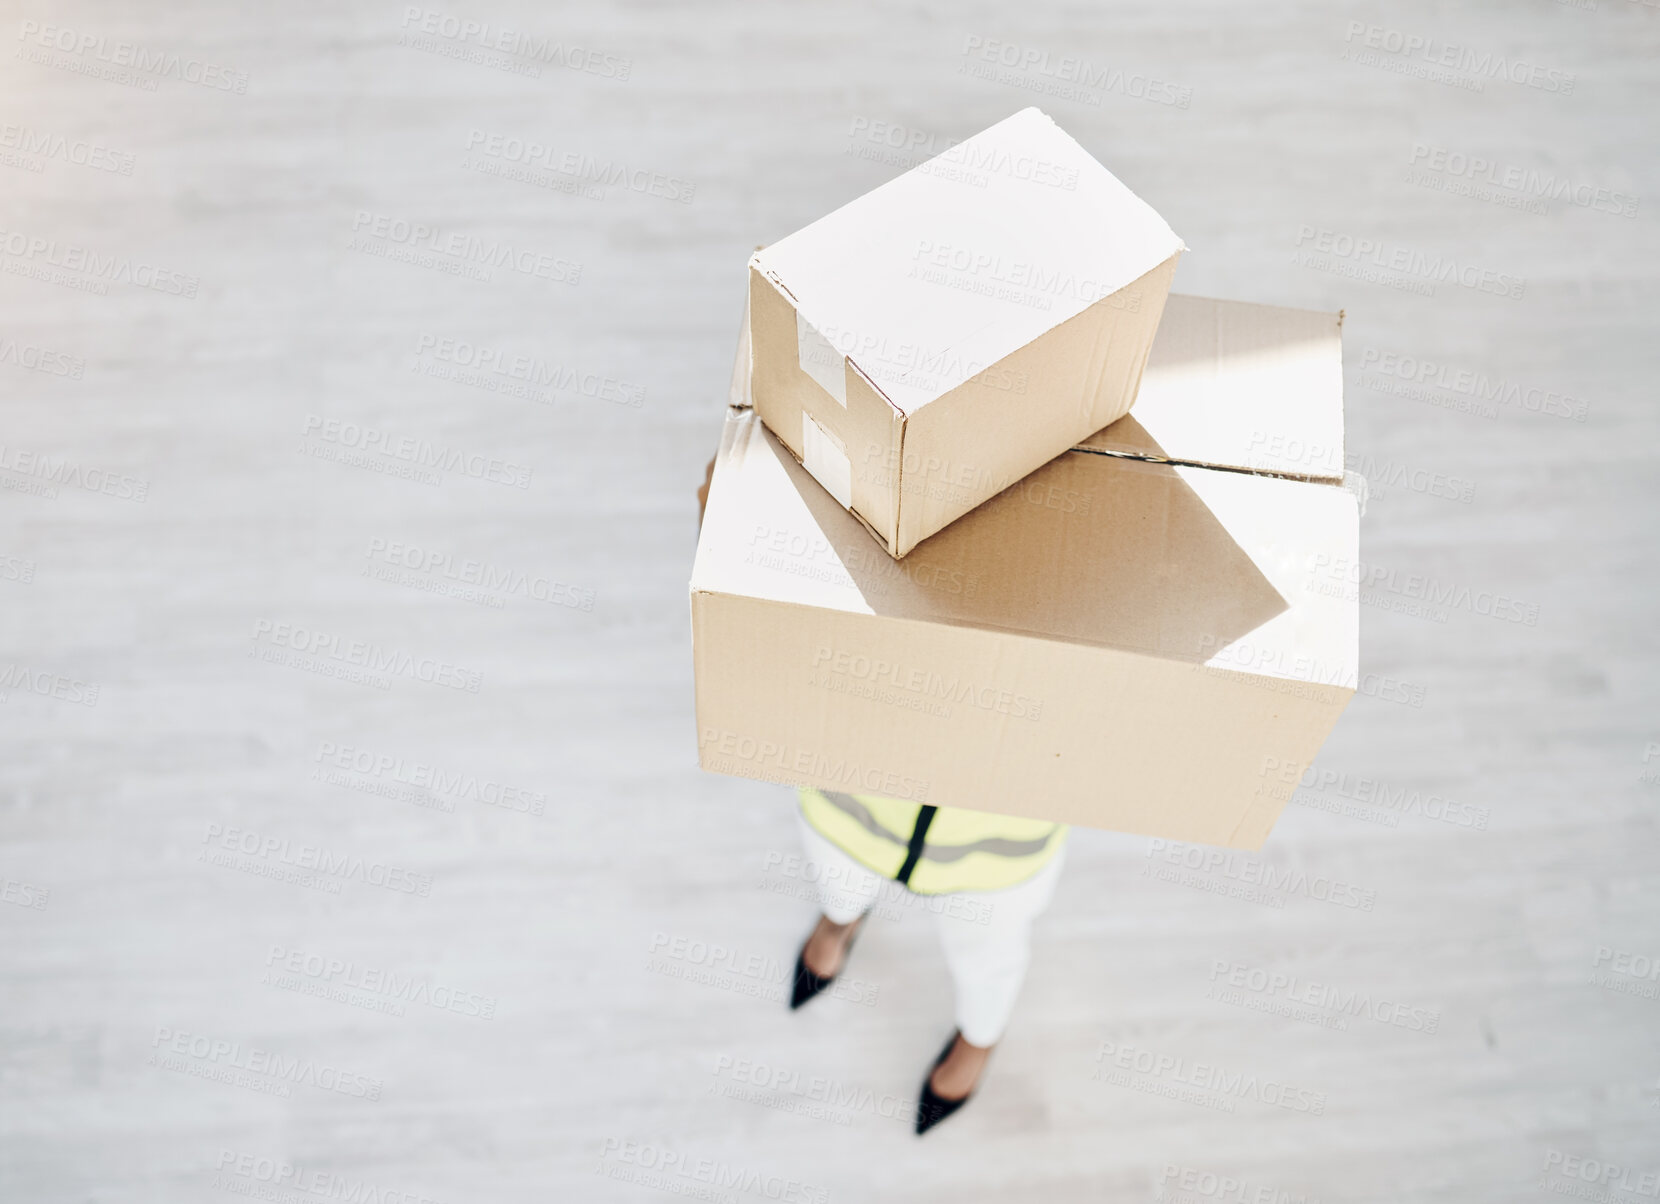 Buy stock photo Delivery, courier person and boxes or package from above for logistics, cargo or shipping industry. A worker or employee with cardboard box or parcel from supply chain for distribution service mockup